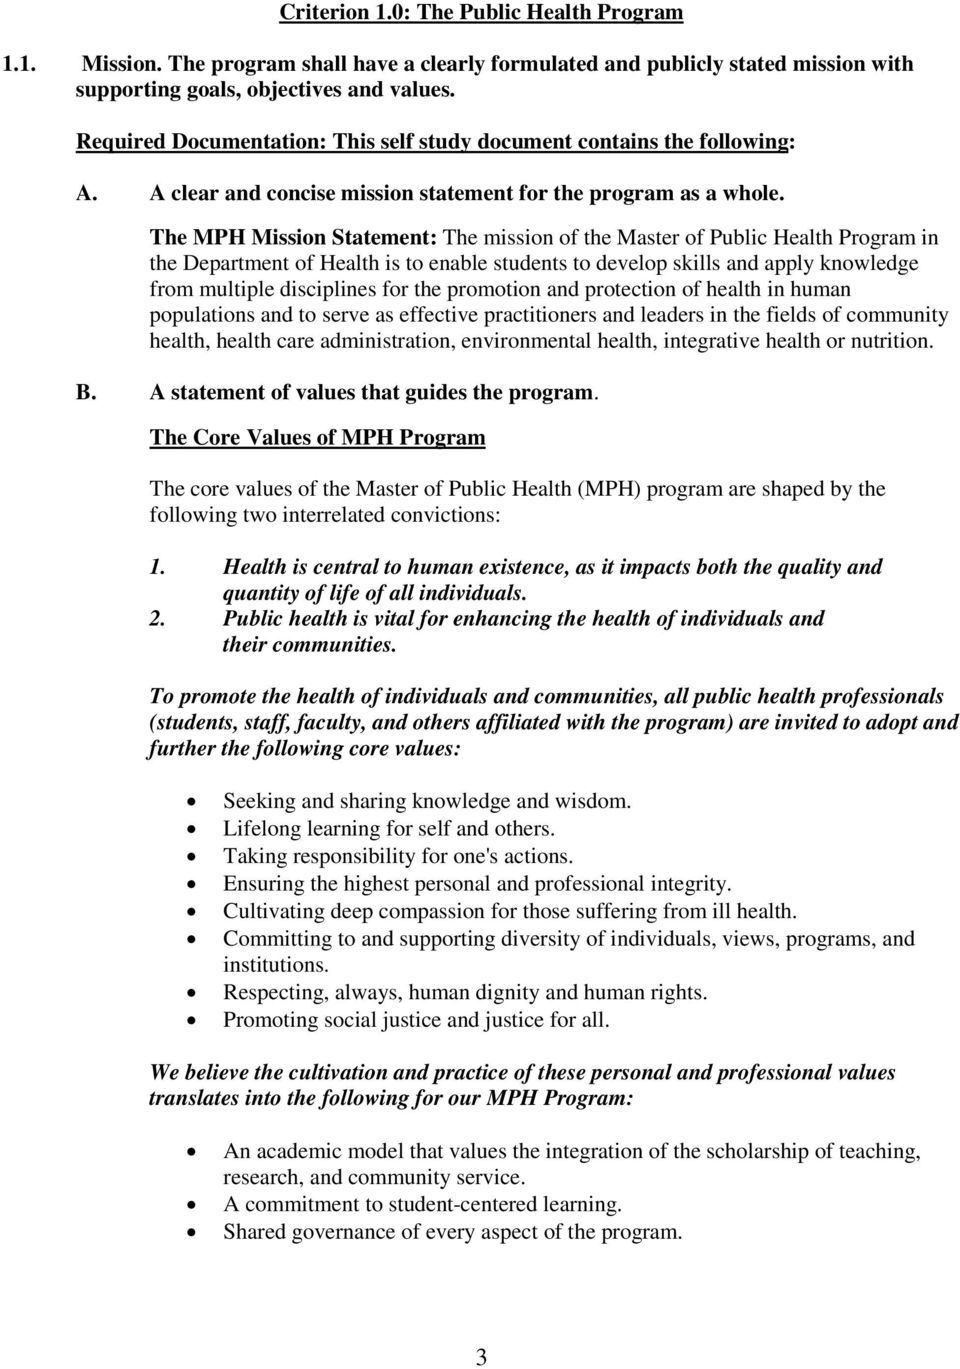 The MPH Mission Statement: The mission of the Master of Public Health Program in the Department of Health is to enable students to develop skills and apply knowledge from multiple disciplines for the